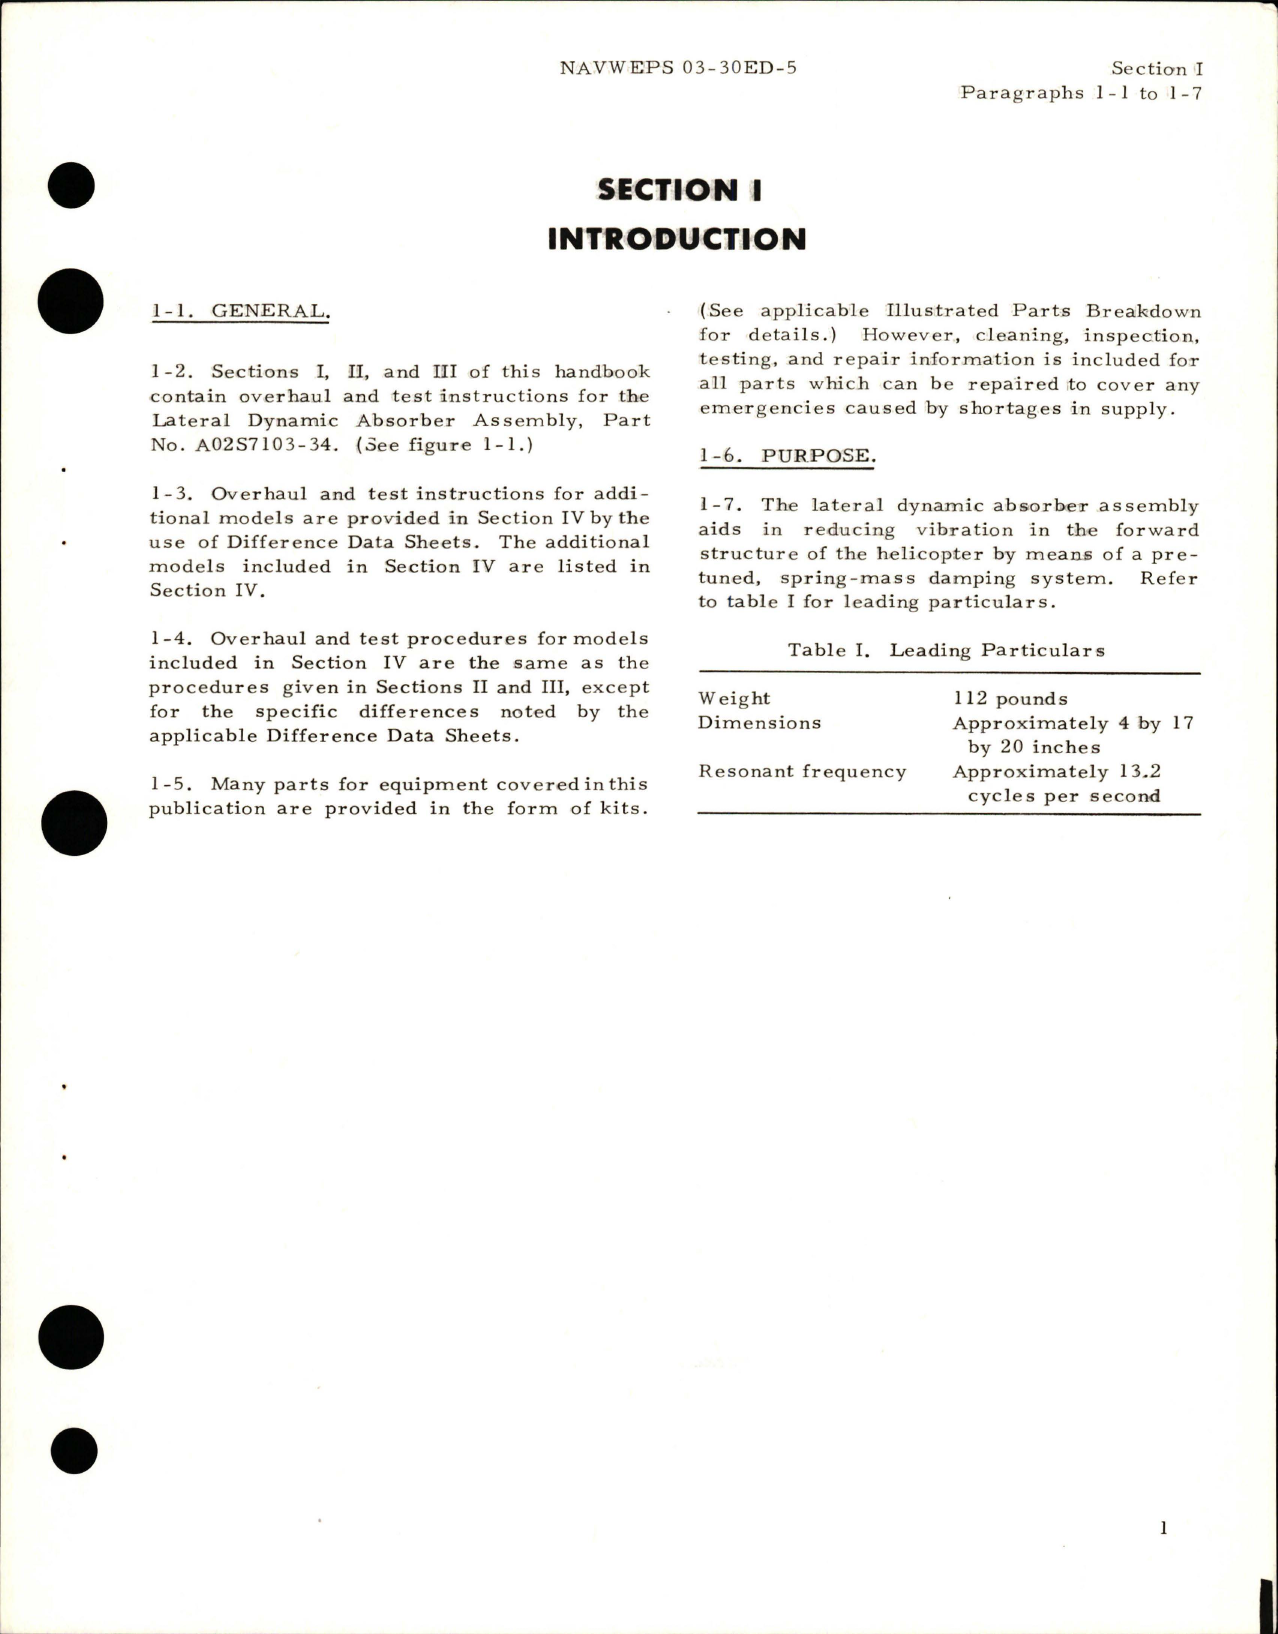 Sample page 5 from AirCorps Library document: Overhaul Instructions for Lateral Dynamic Absorber Assembly - Part A02S7103-34, A02S7103-41